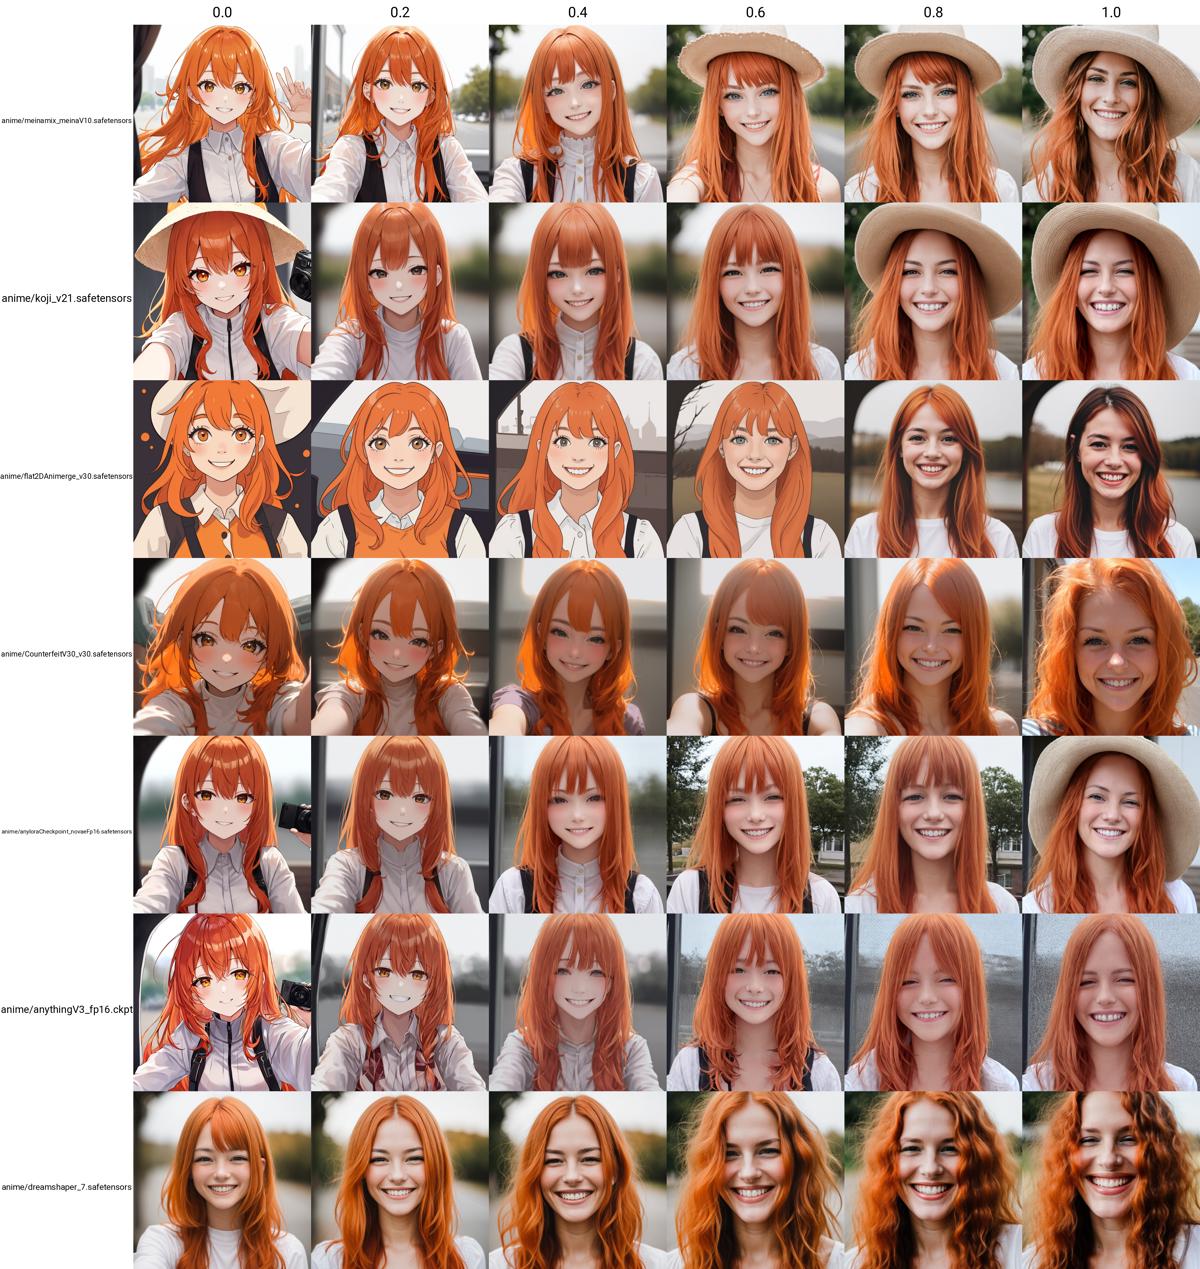 anime characters with orange hair